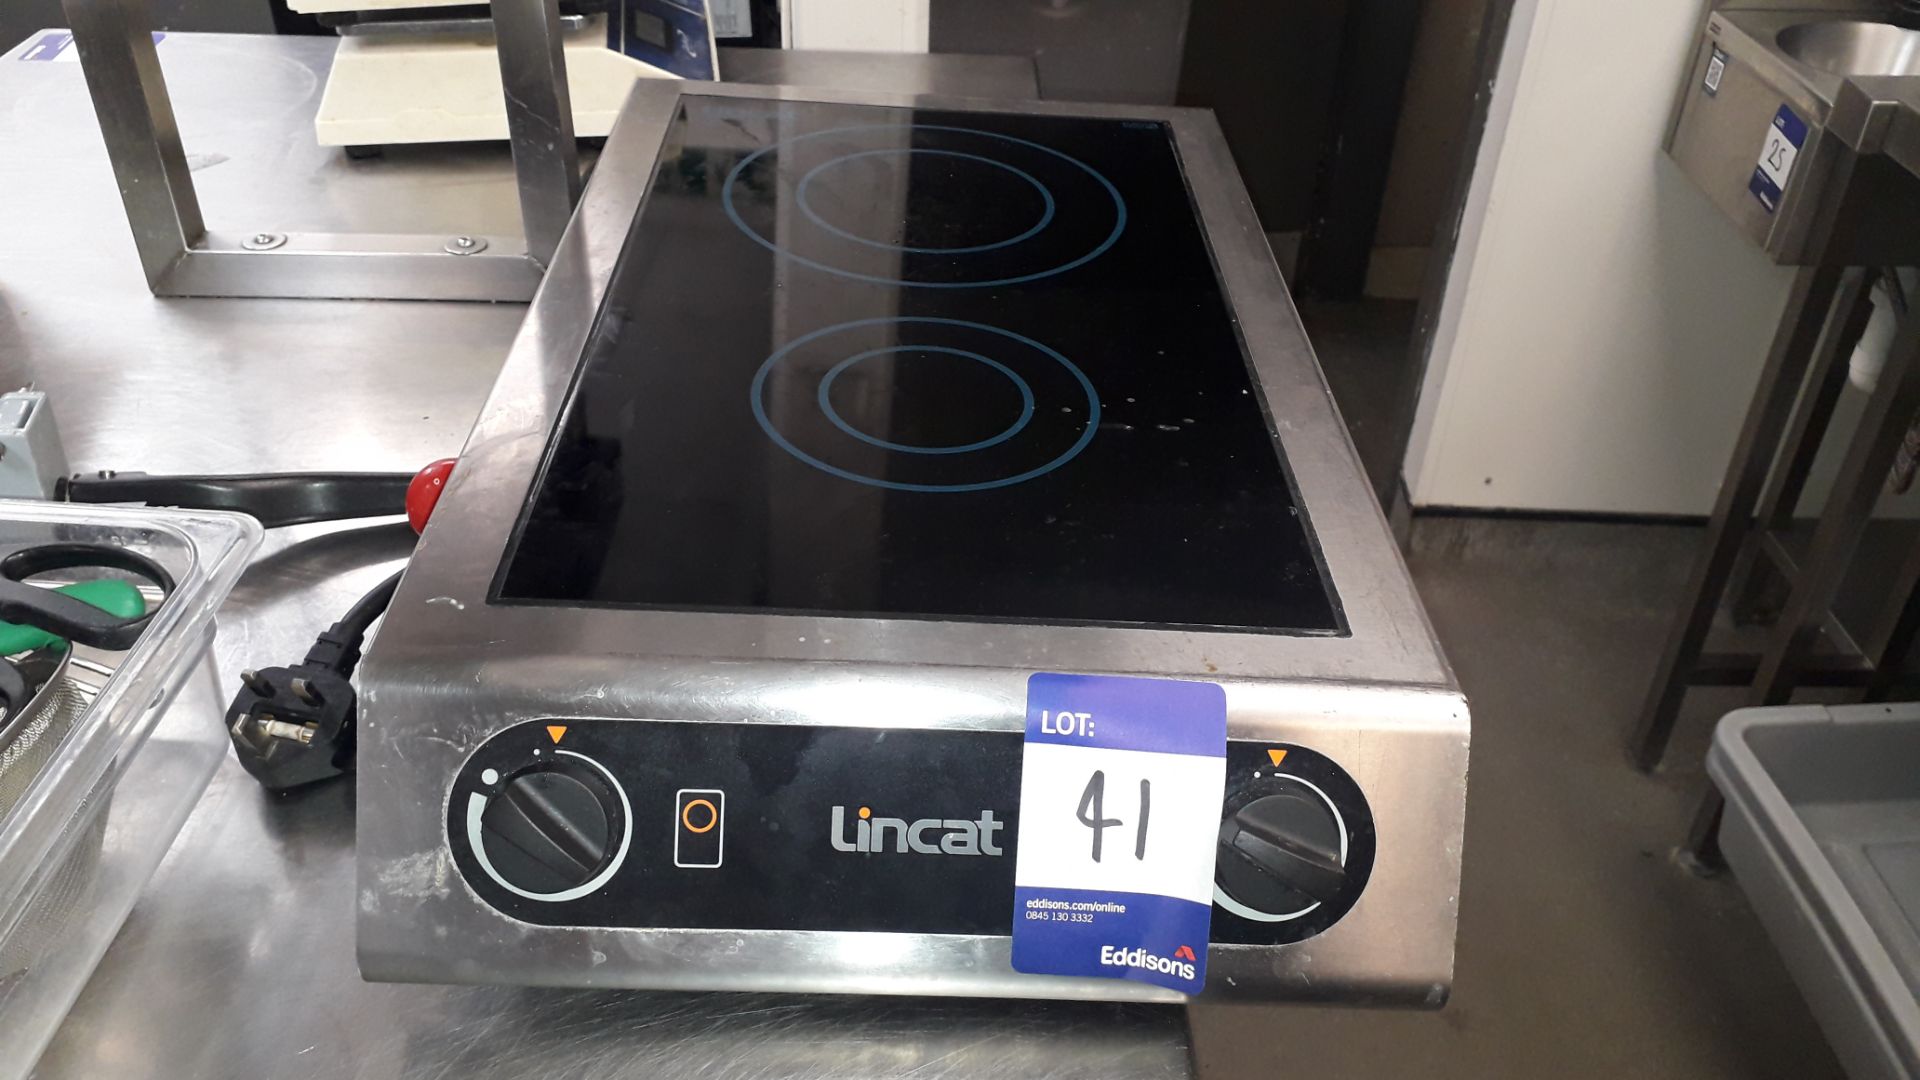 Lincat IH21 A002 Electric Induction Hob Serial Num - Image 2 of 3